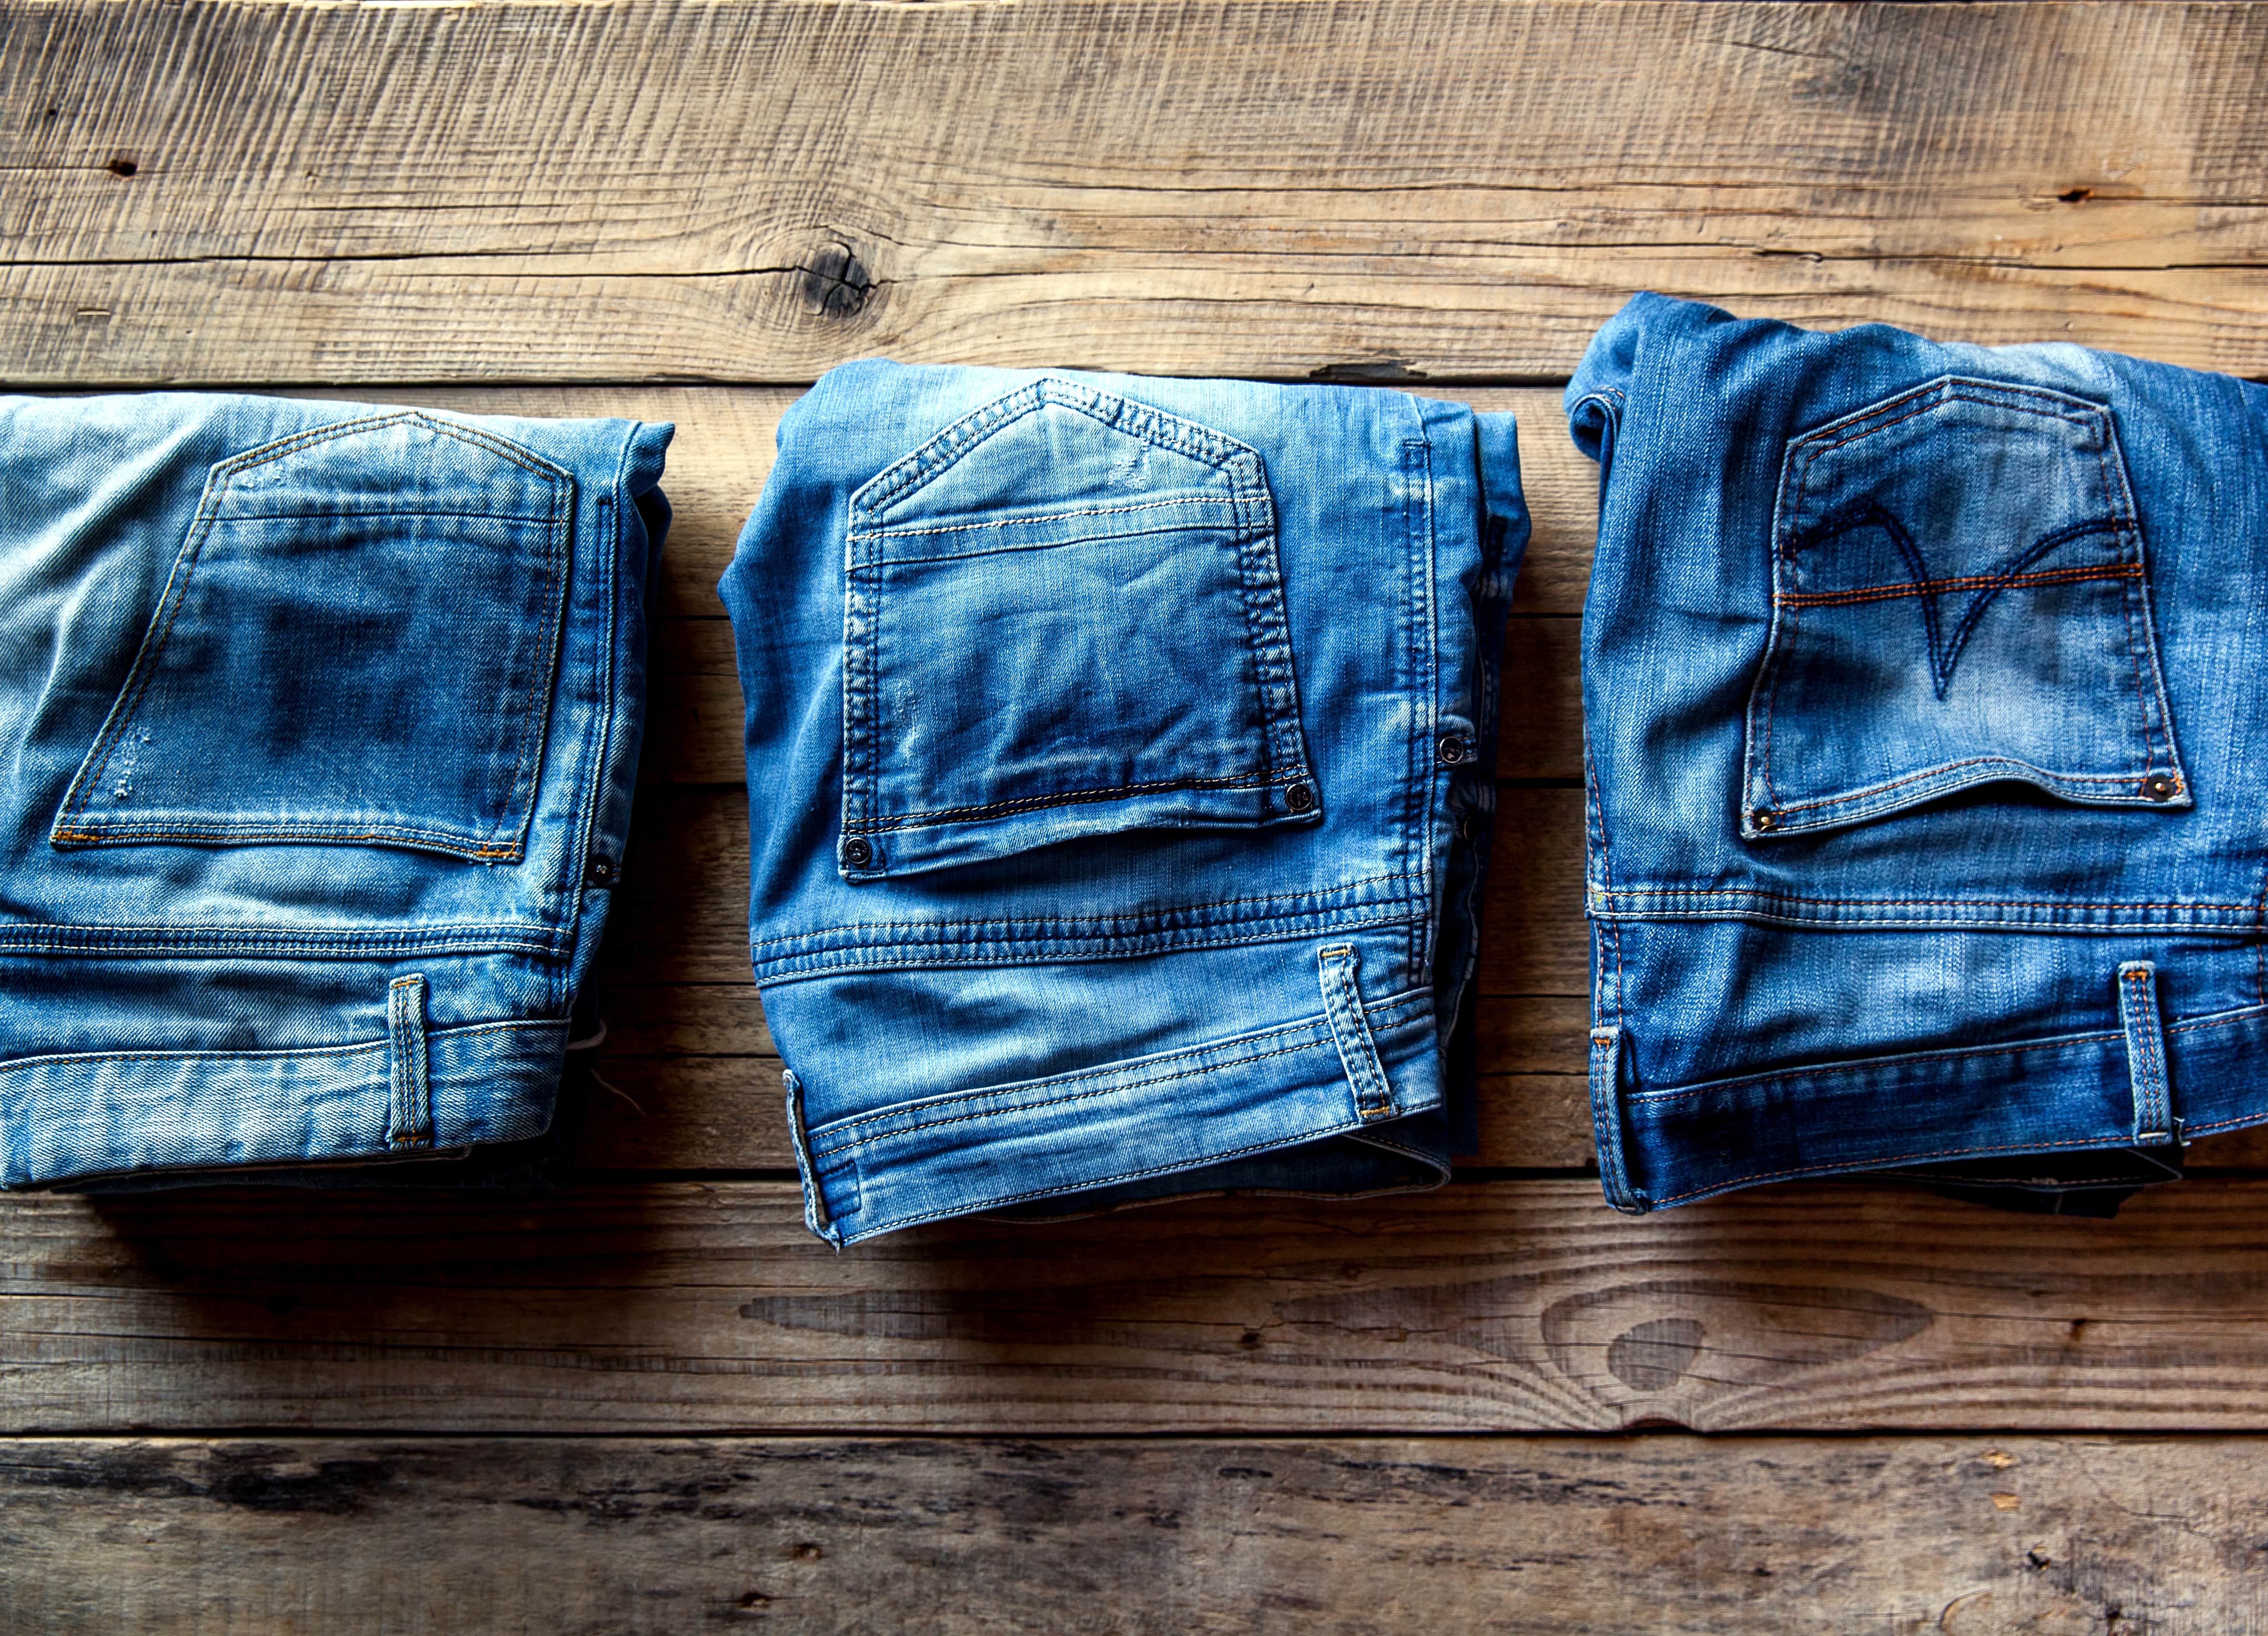 Why Jeans is Popular: The Remarkable History of Denim